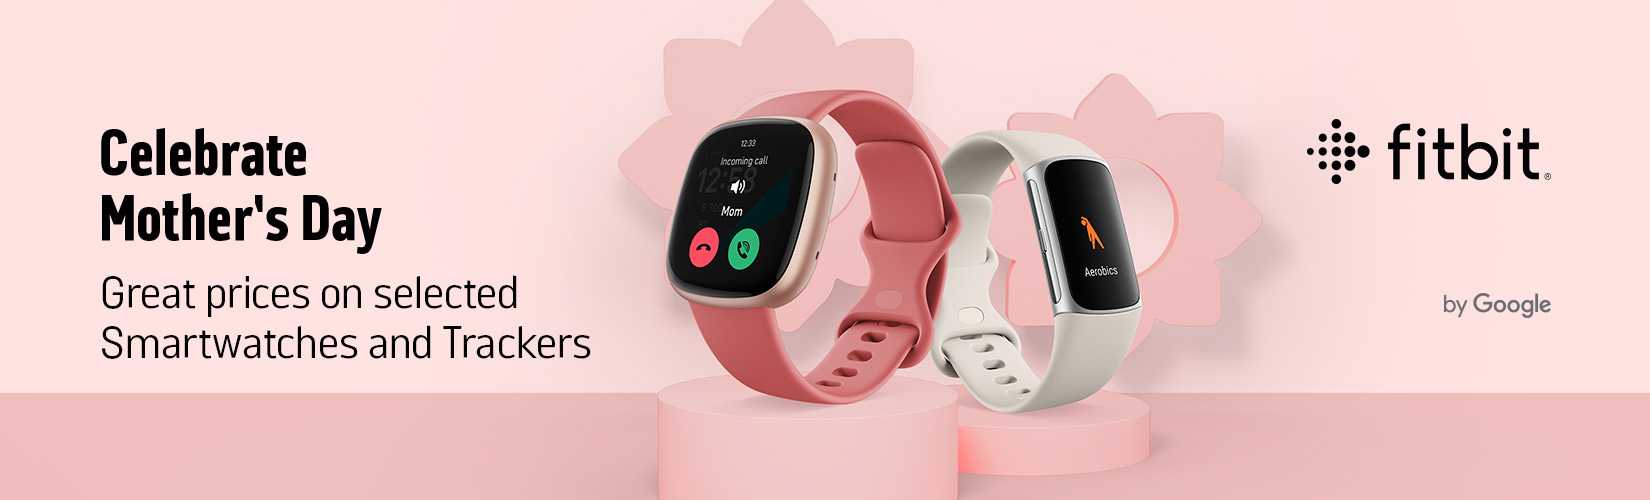 Celebrate Mother's day. Great prices on selected Smartwatches and Trackers.